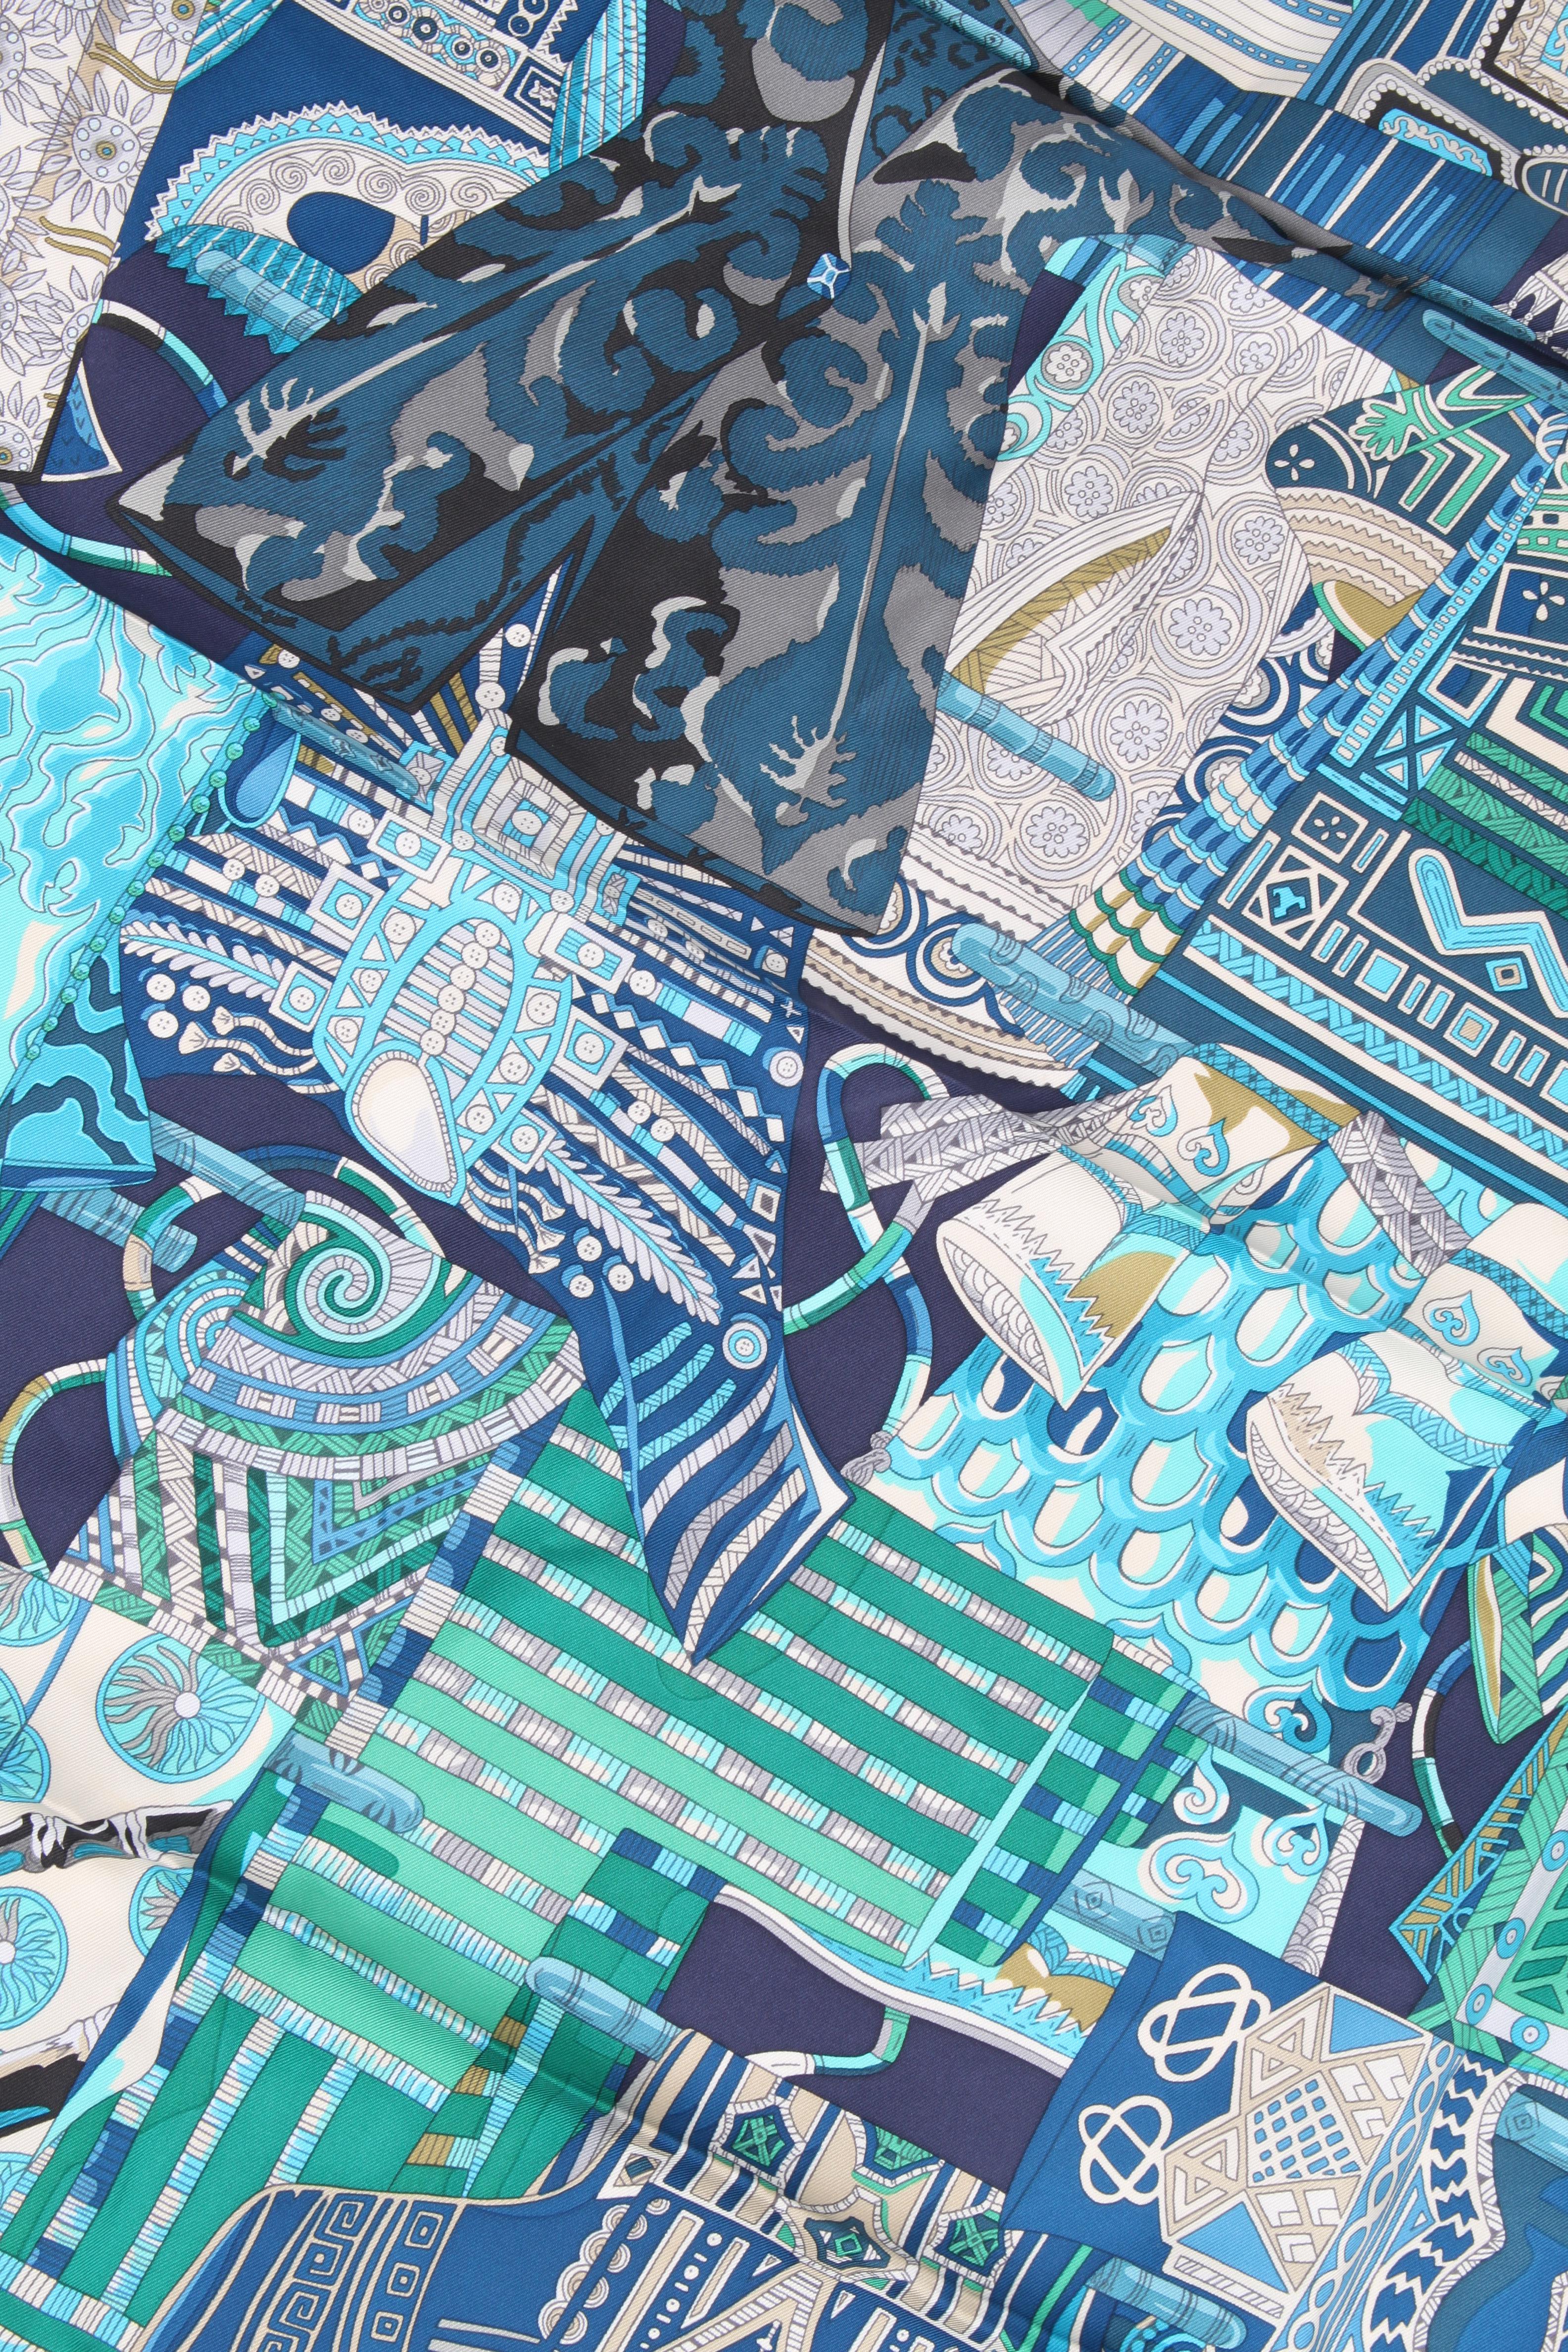 This fantastic silk scarf by Hermes is covered with a print in a blue color scheme on a dark blue foundation.

Name: Voyage en Étoffes
Measurements: 90 x 90 centimeters
Colors: blue, turquoise, green, white
Material: silk
Condition: like new,